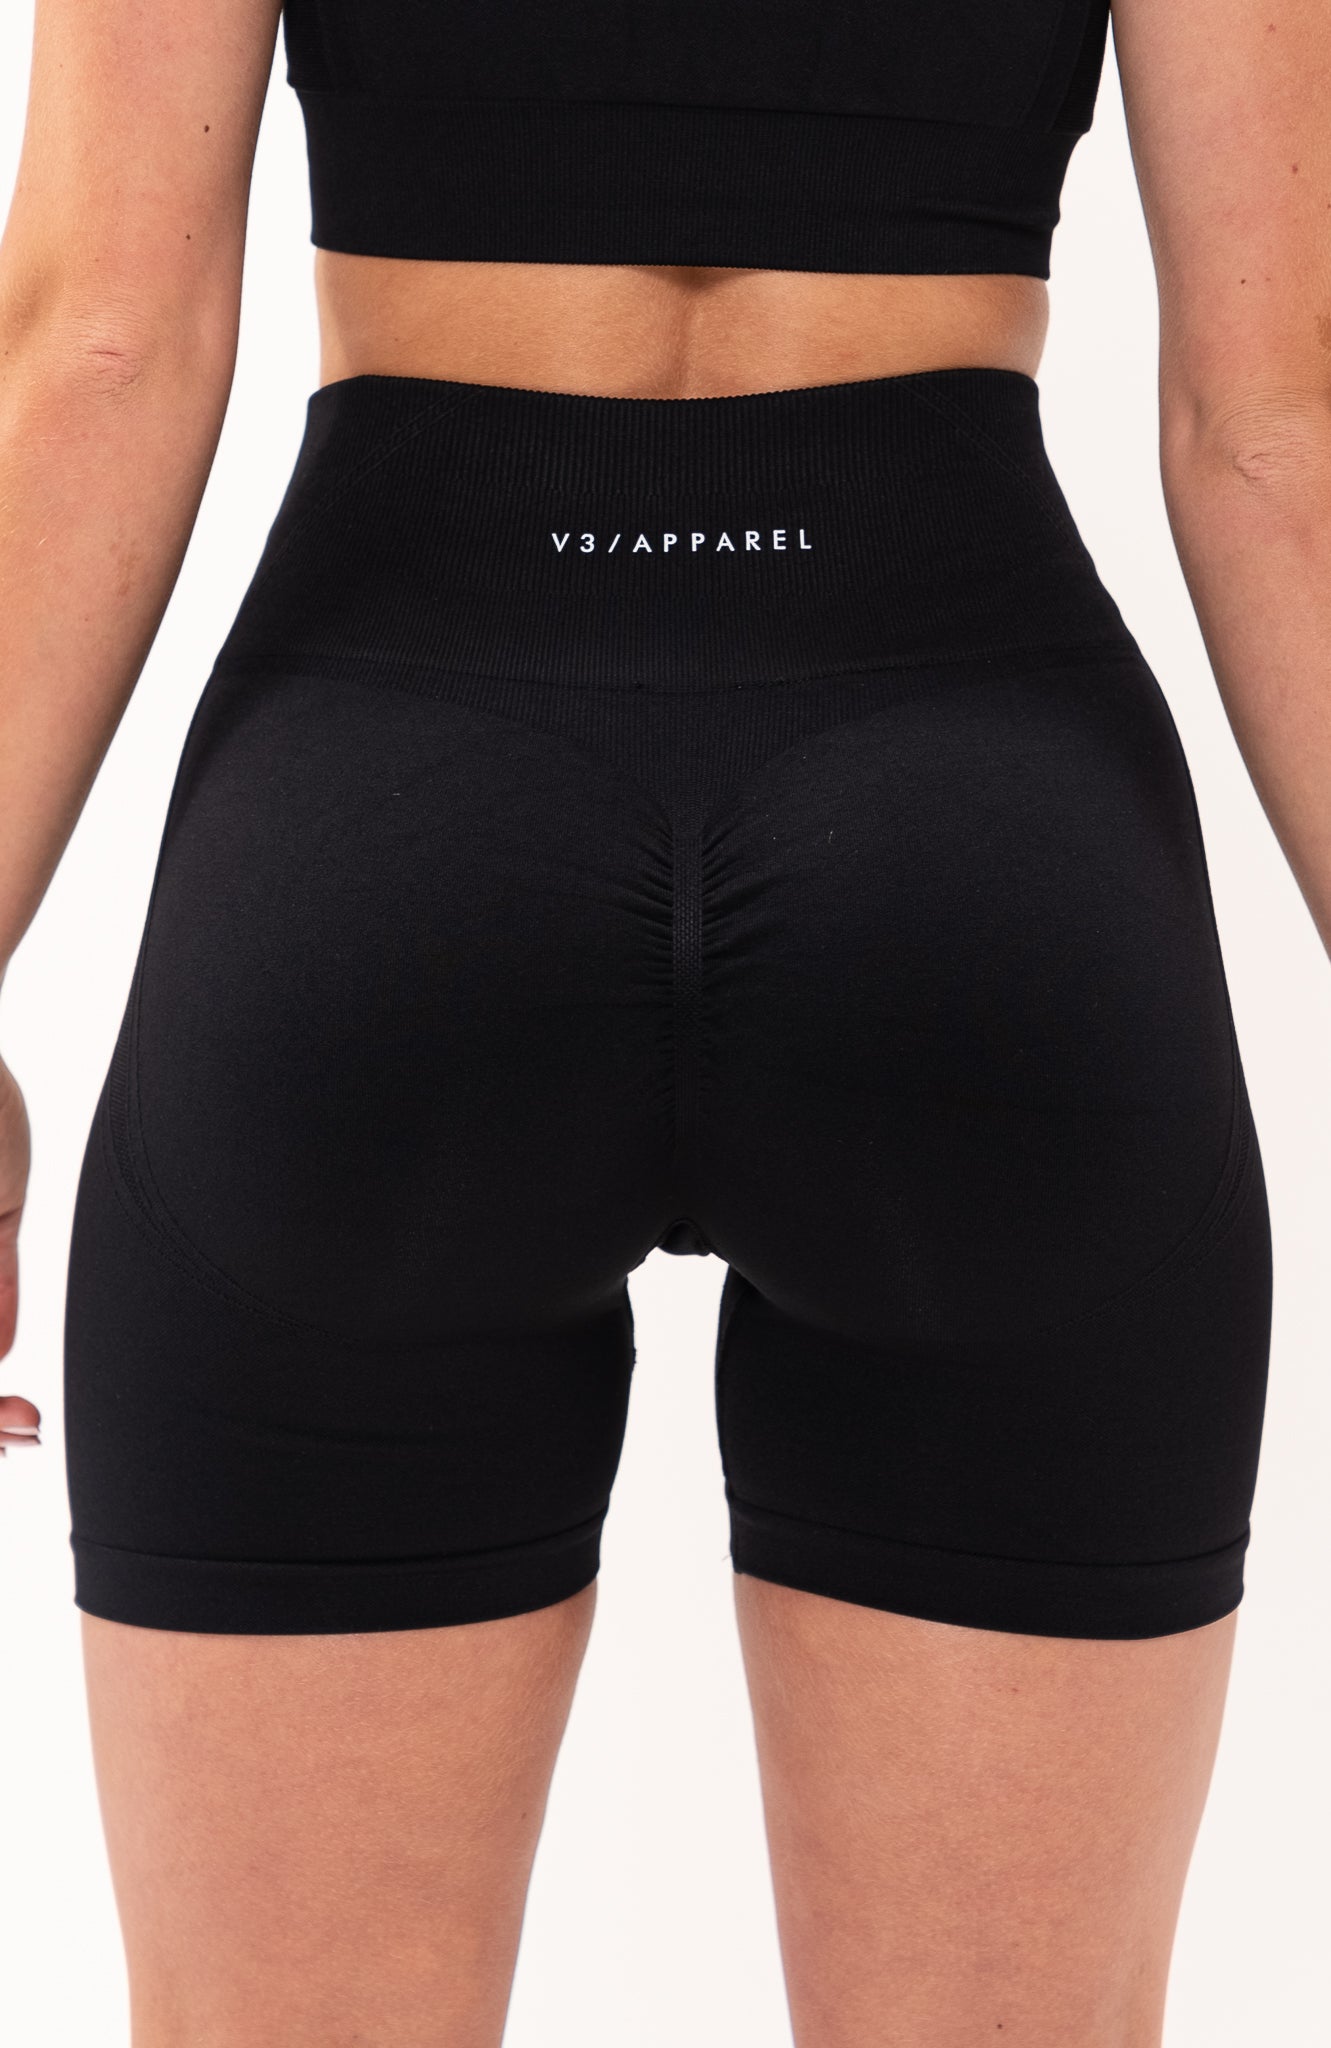 redbaysand Women's Tempo seamless scrunch bum shaping high waisted cycle shorts in black – Squat proof 5 inch leg gym shorts for workouts training, Running, yoga, bodybuilding and bikini fitness.